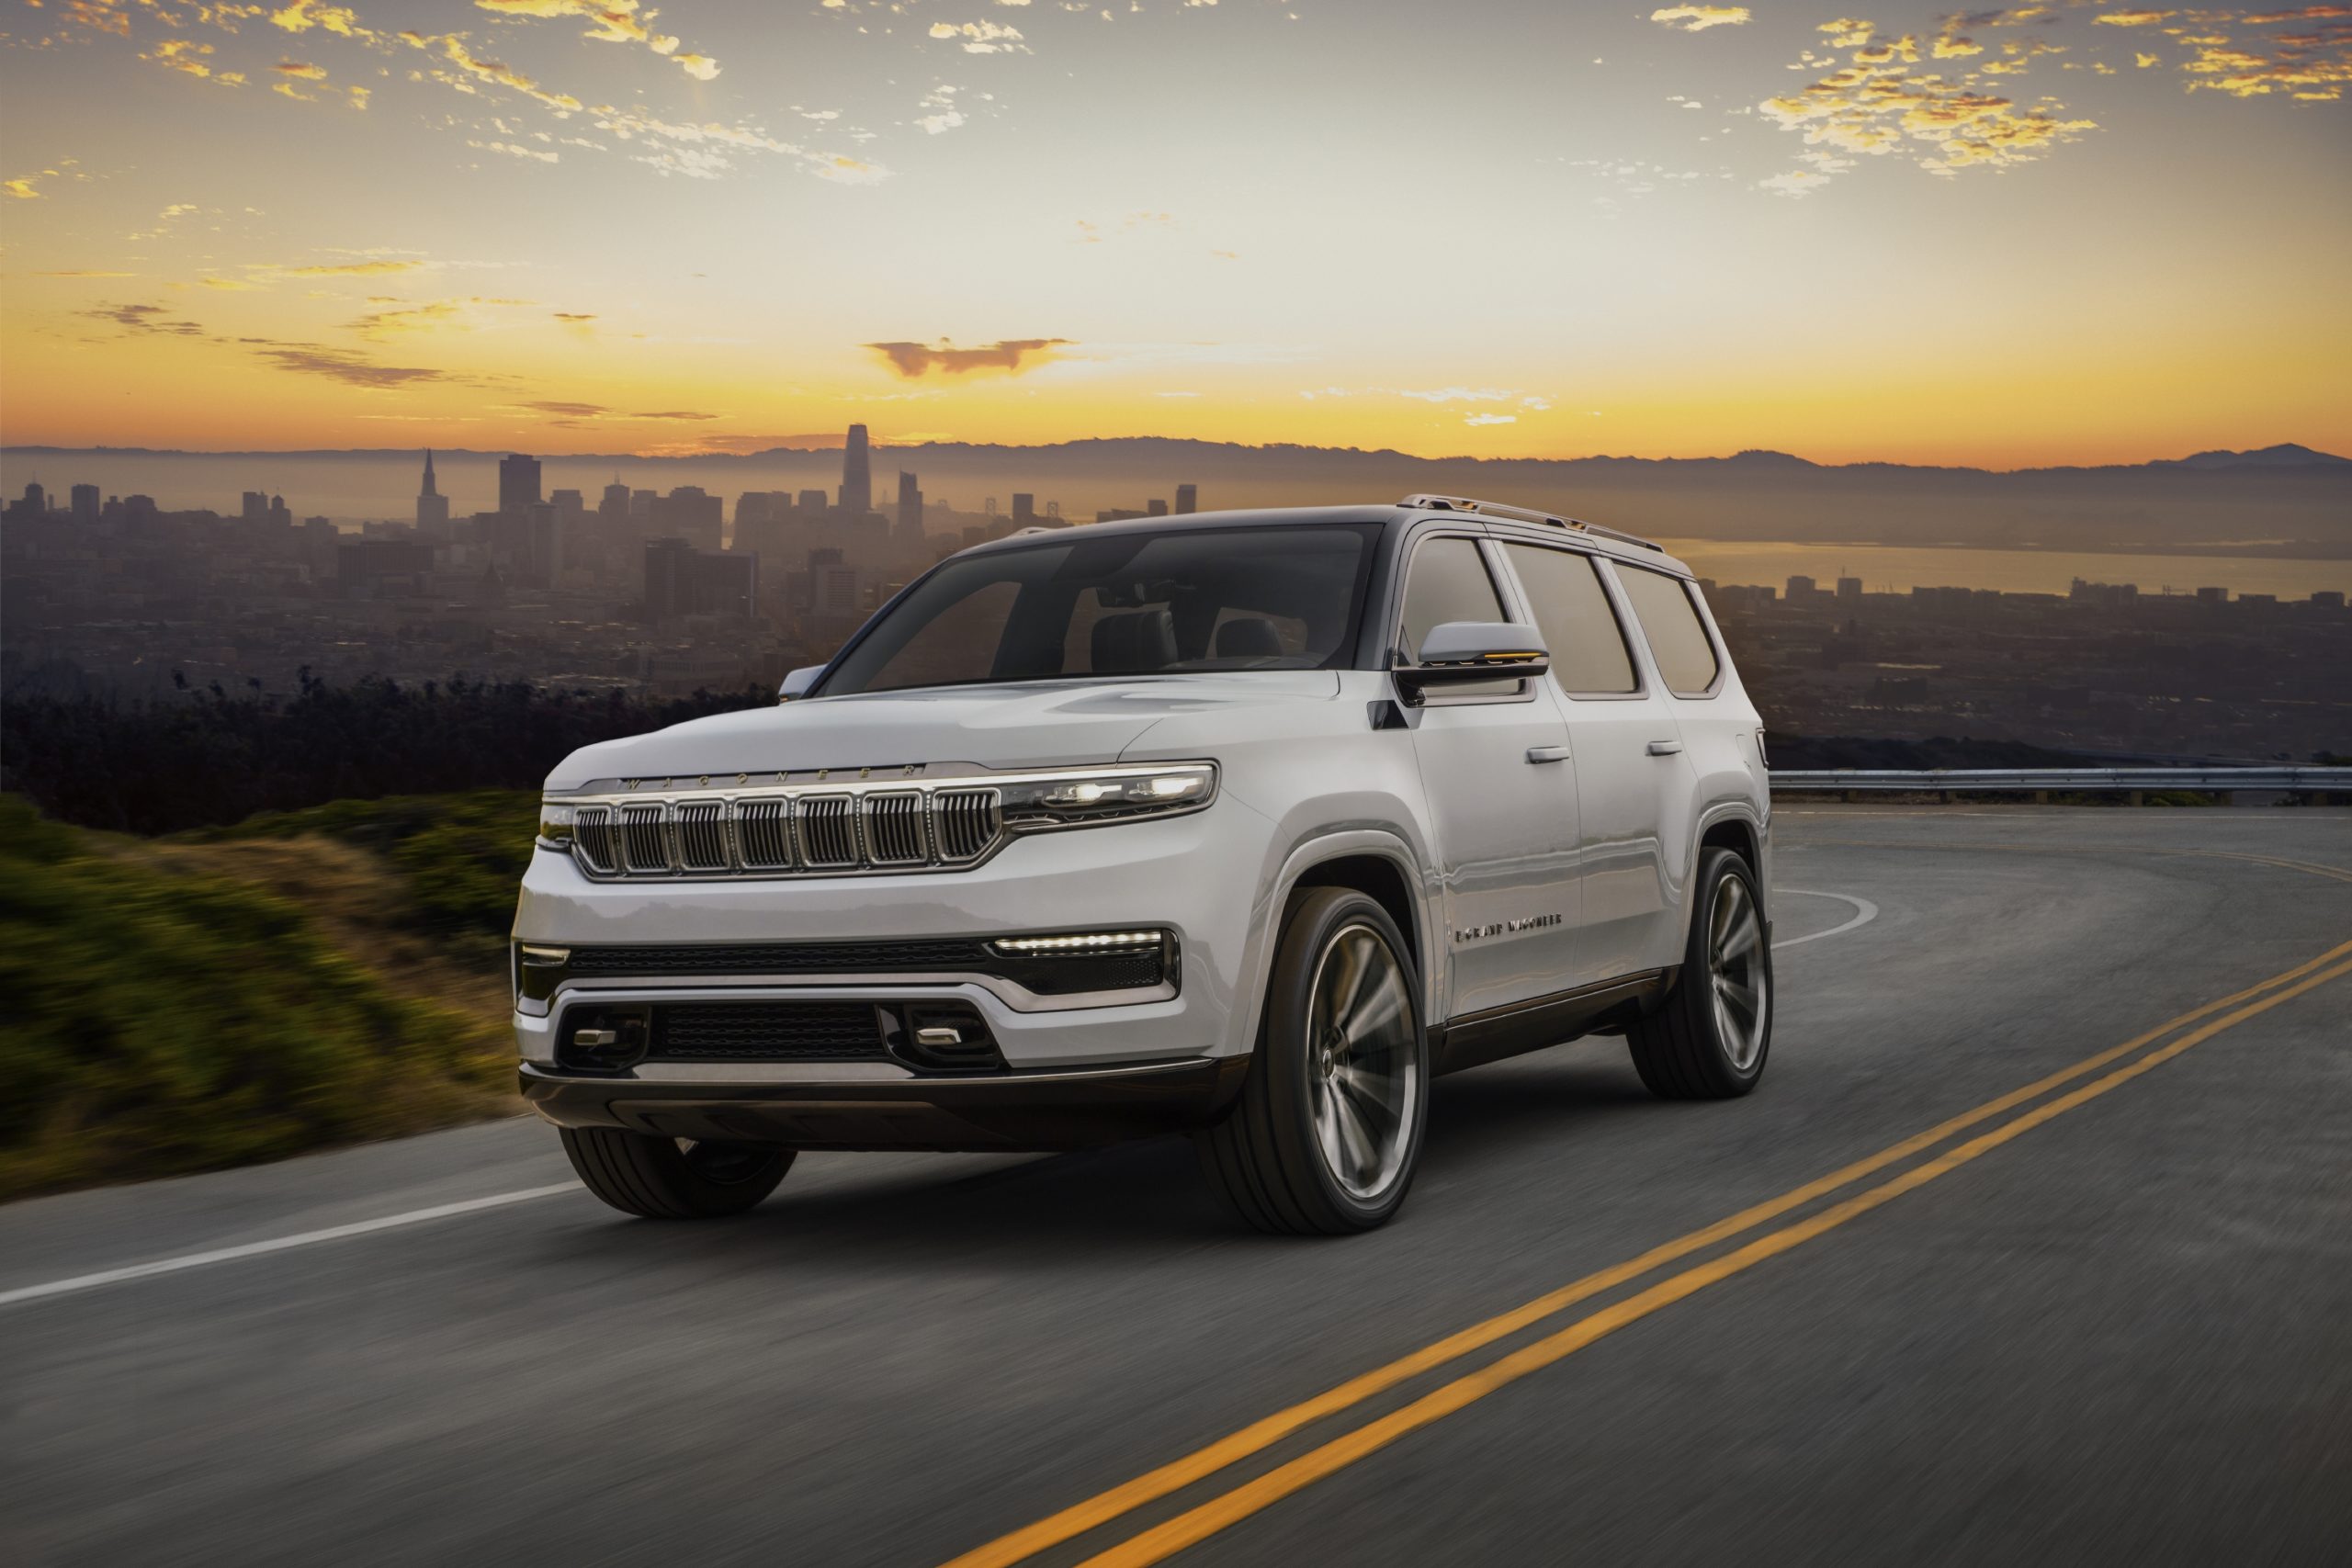 Jeep Unveils Grand Wagoneer Concept | THE SHOP